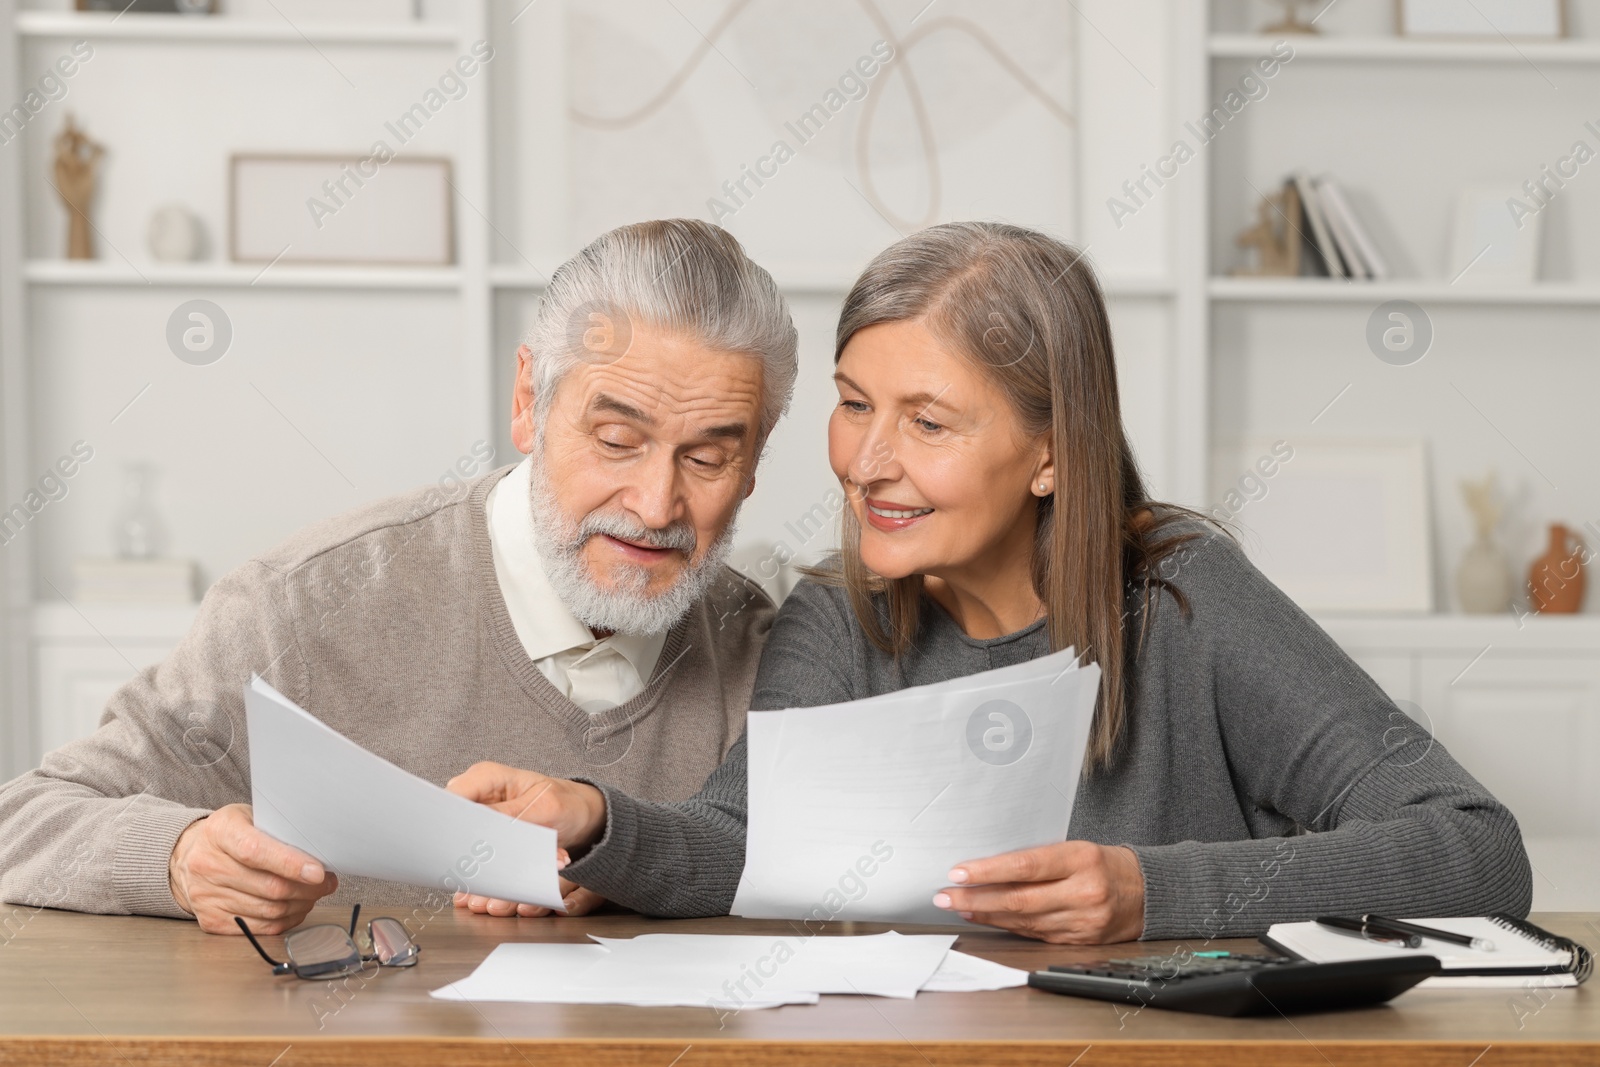 Photo of Elderly couple with papers discussing pension plan at wooden table in room